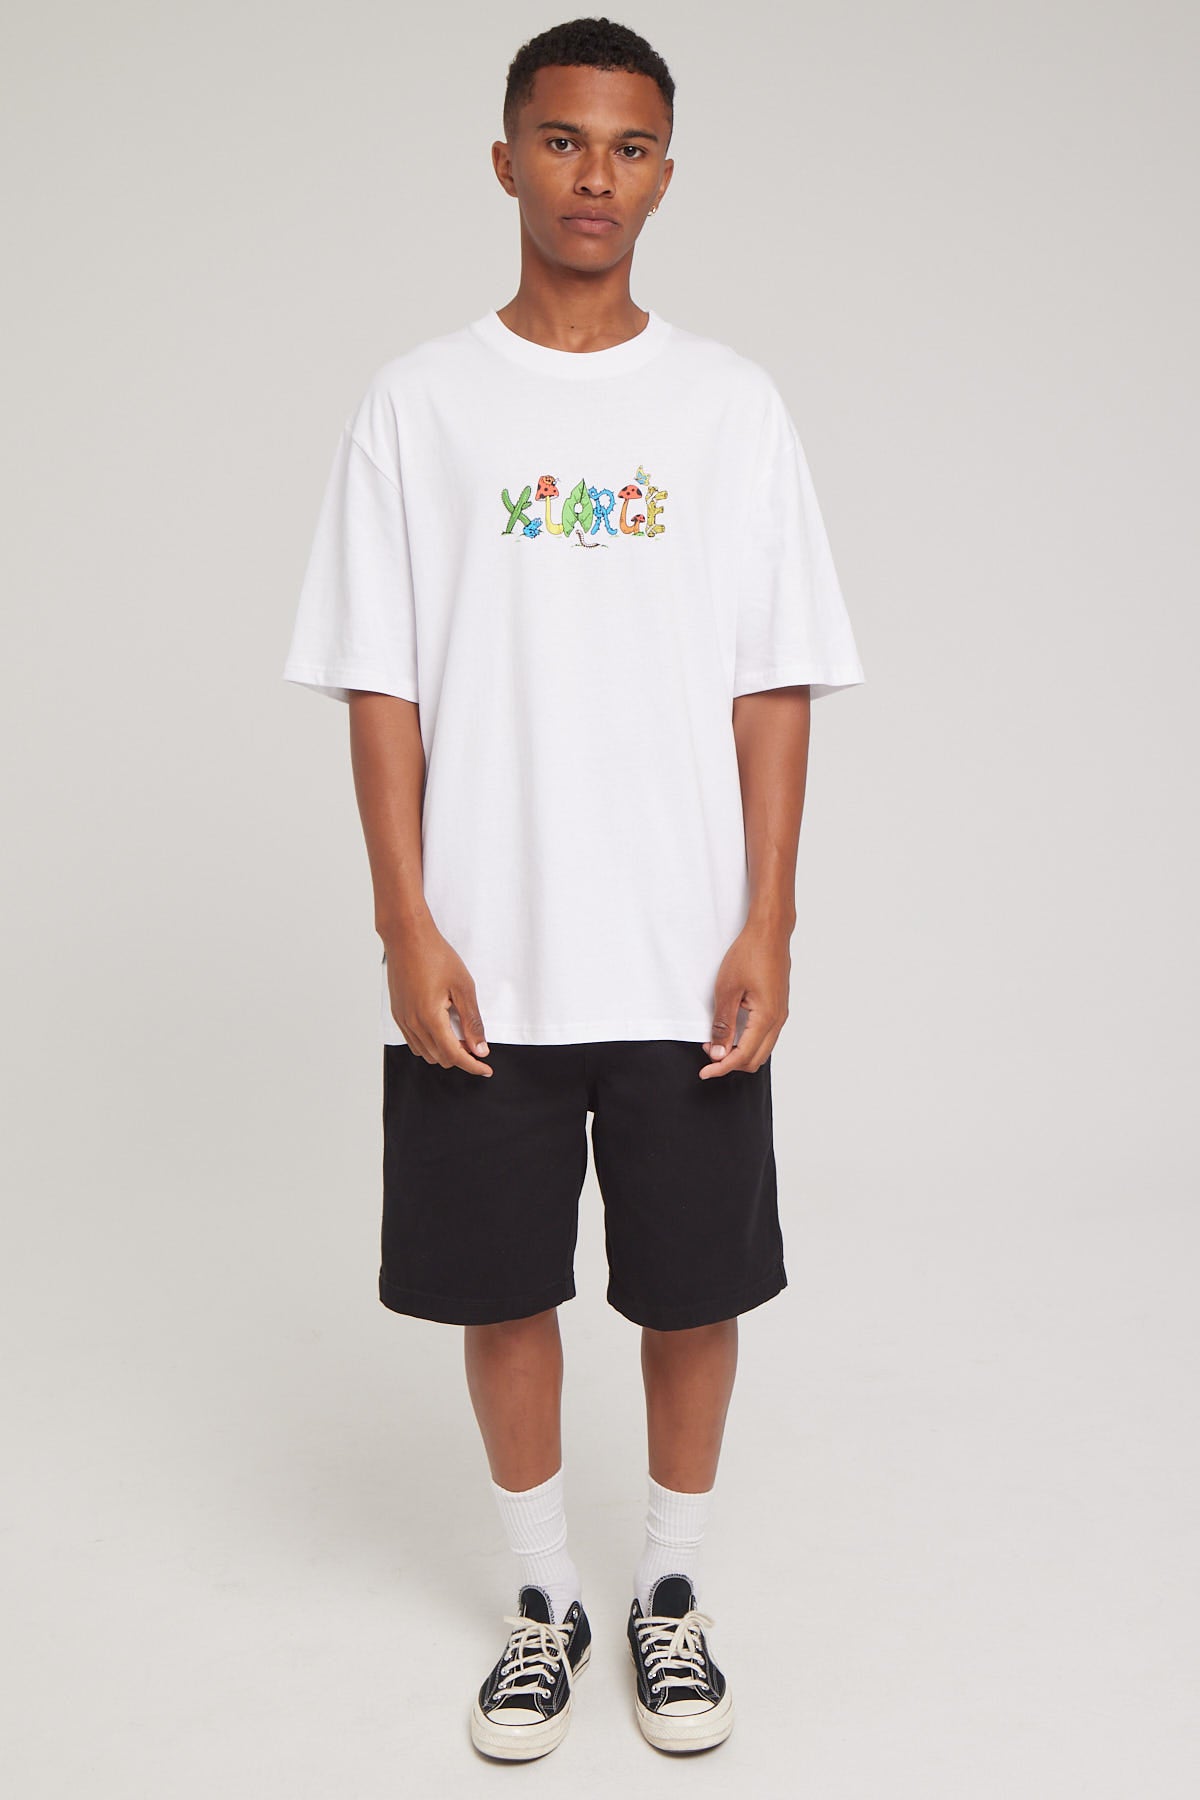 Xlarge Outdoors Boxy Tee Solid White